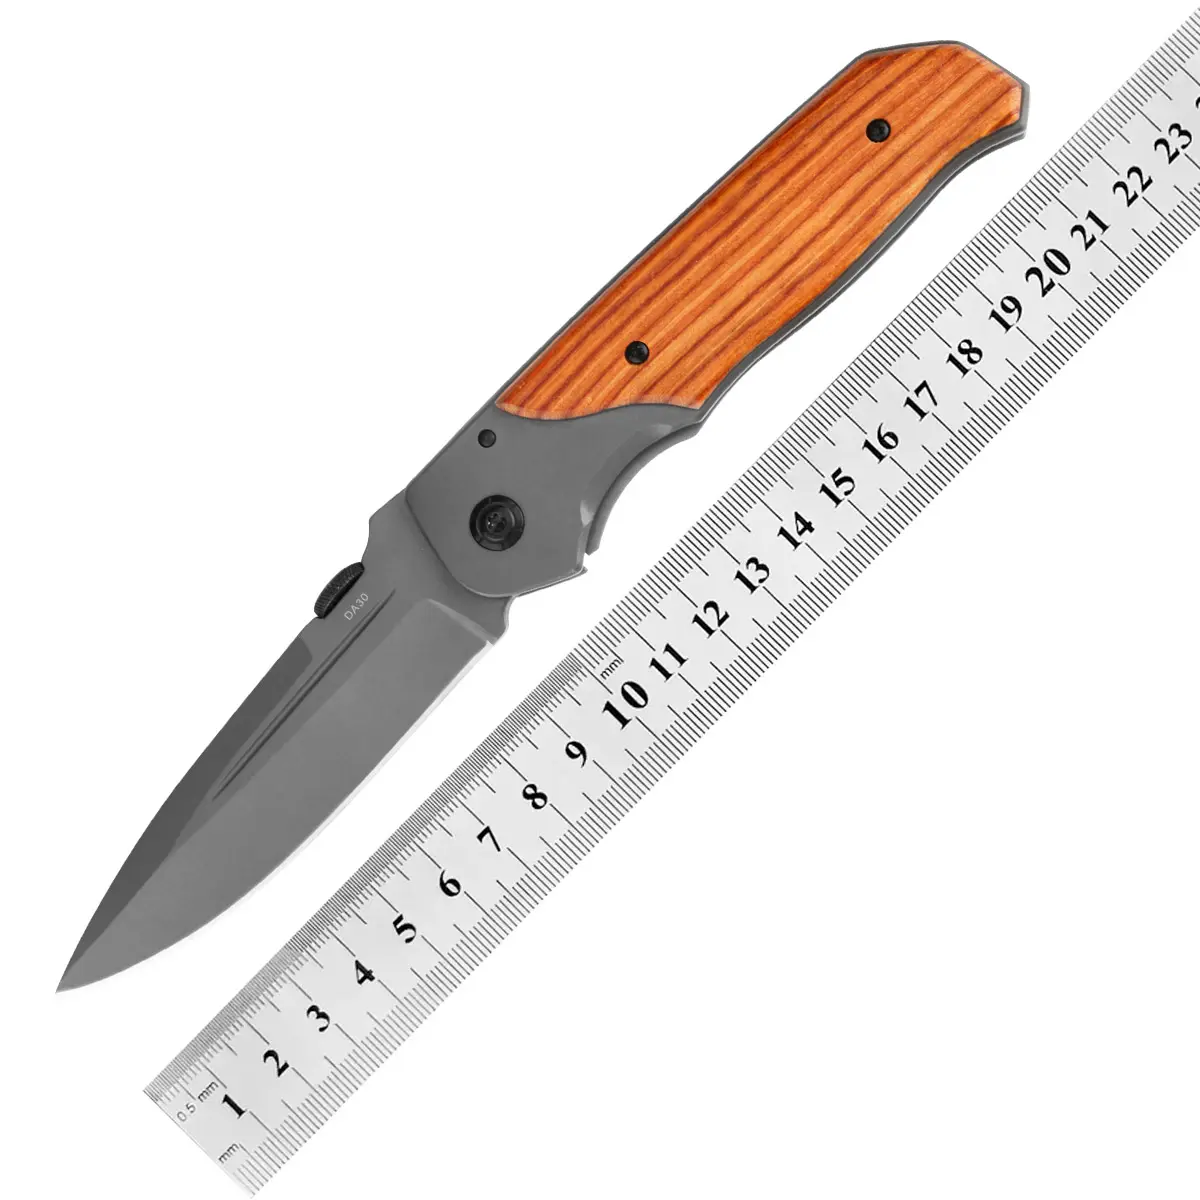 BR DA30 Stainless Steel Wood Handle Folding Pocket Knife Suitable For Camping Survival Knives